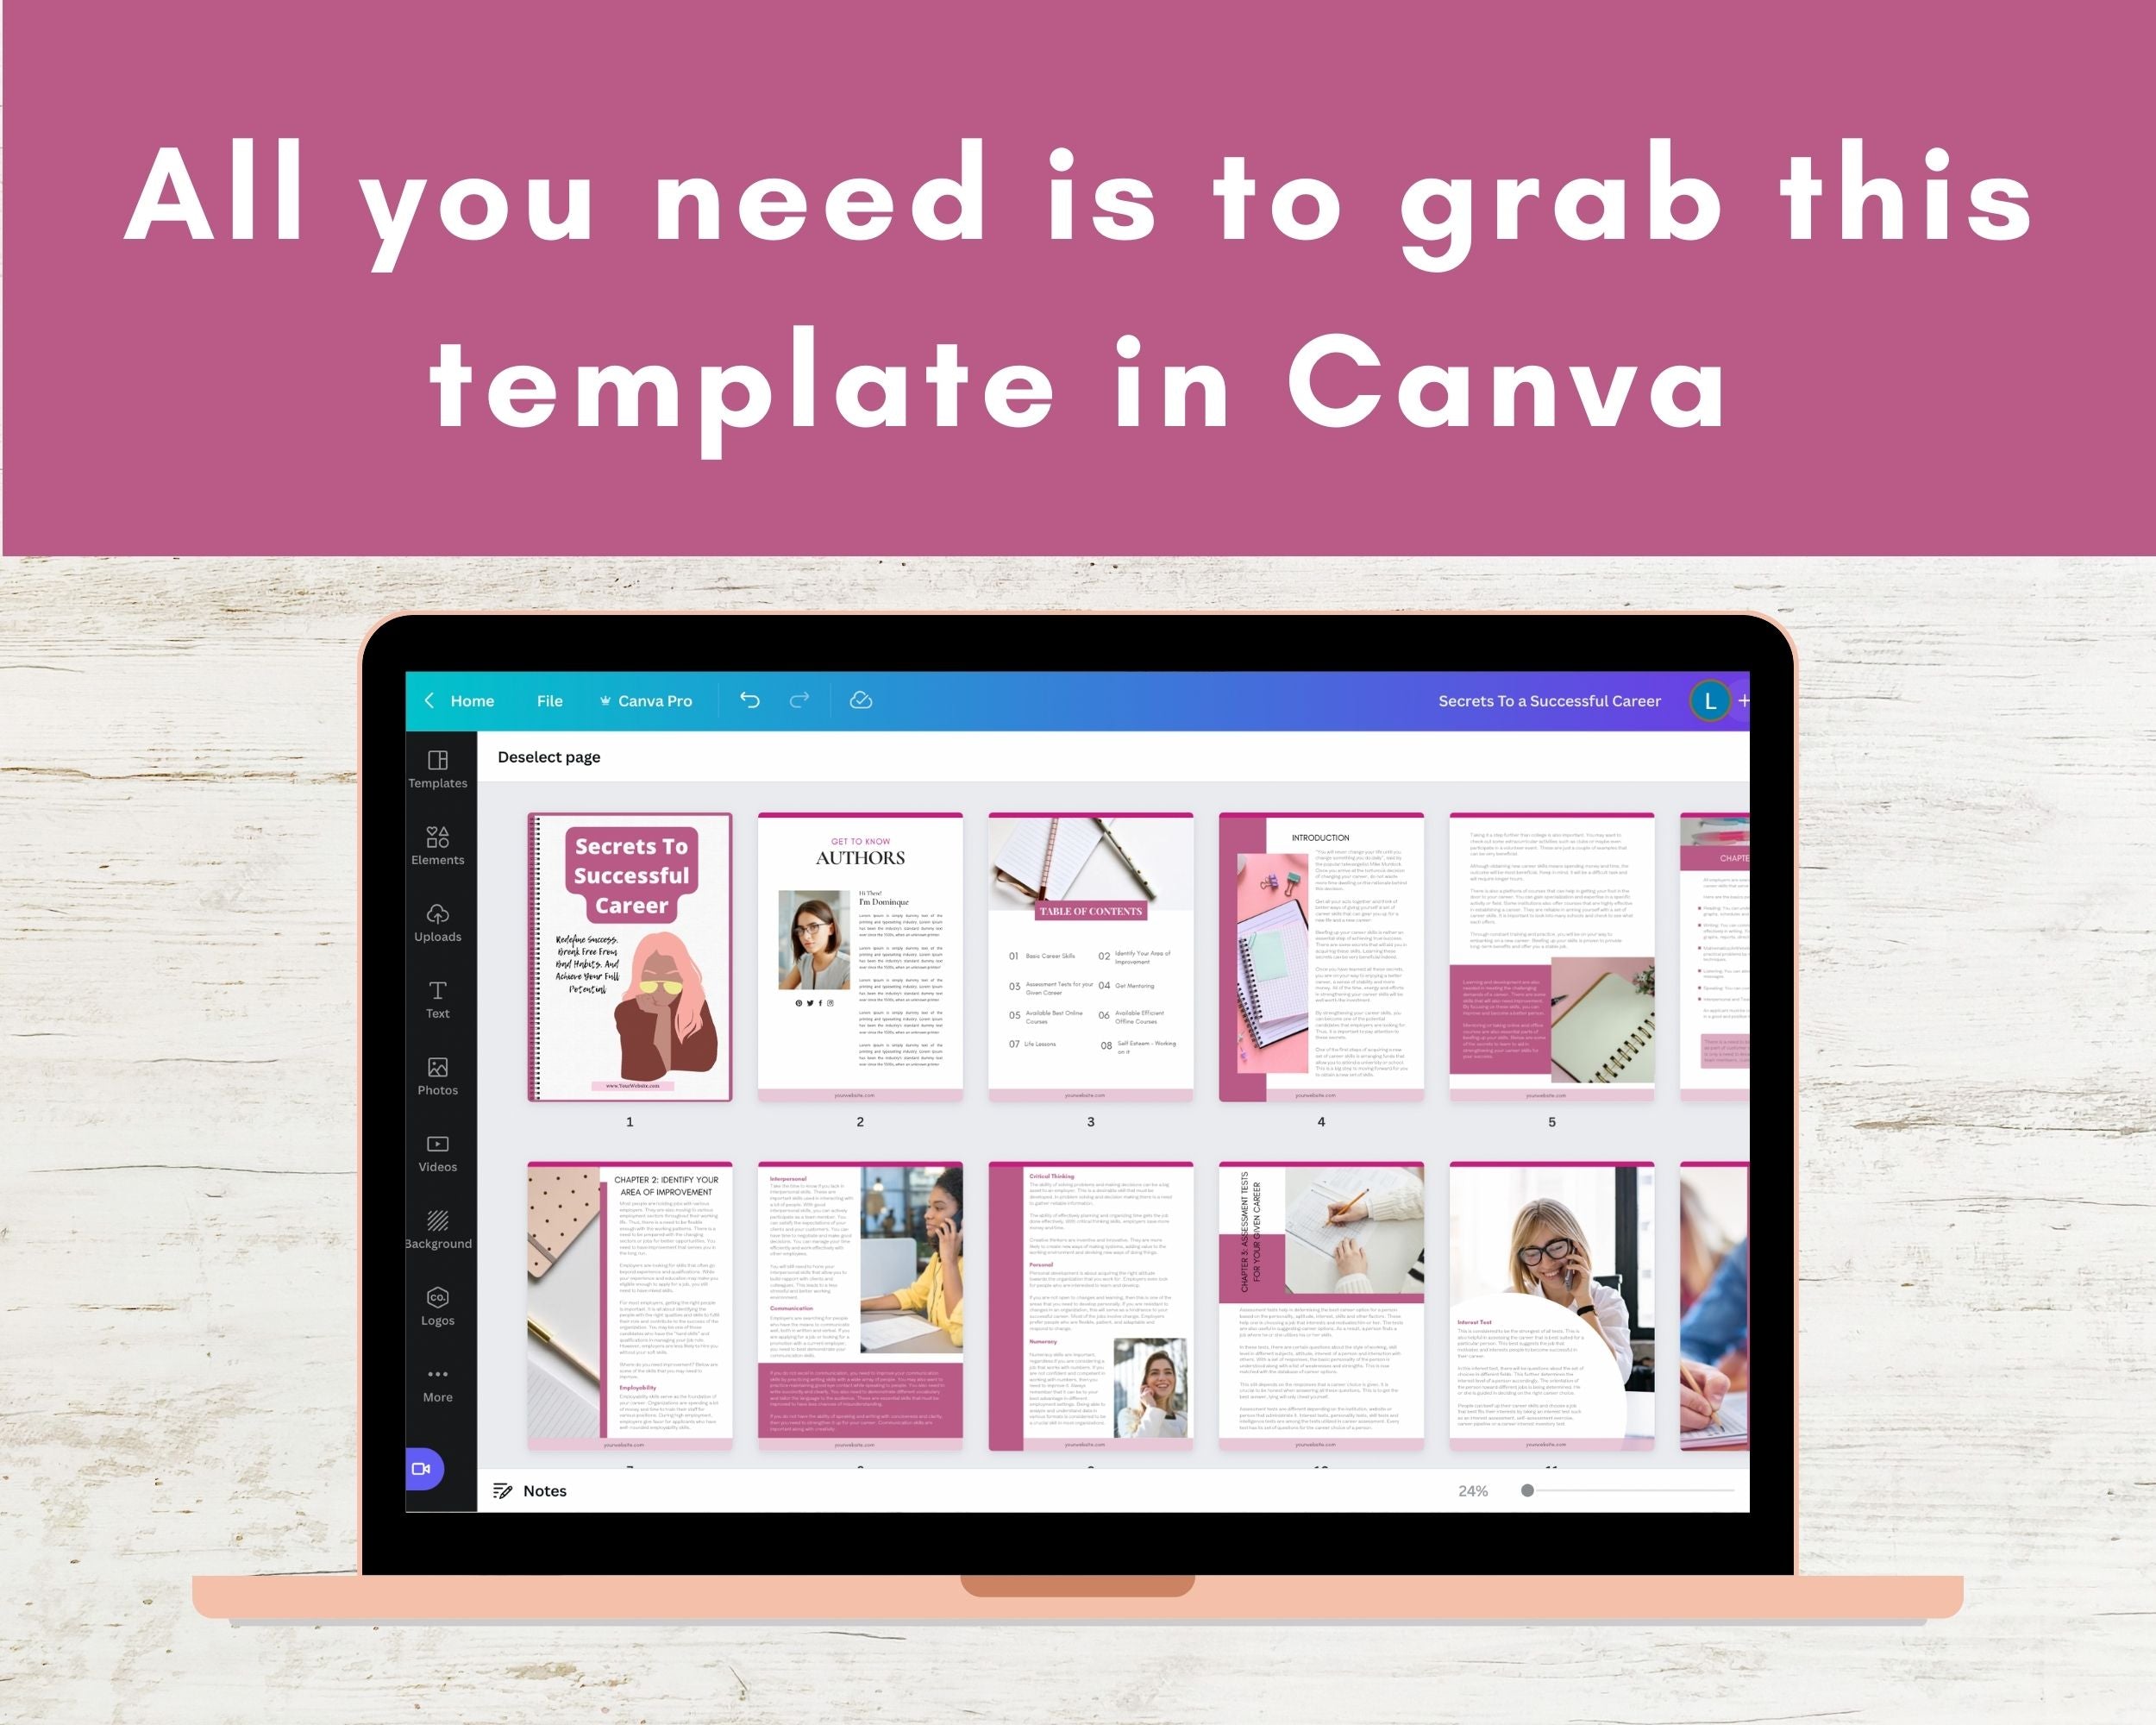 Editable Secrets To Successful Career Ebook | Done-for-You Ebook in Canva | Rebrandable and Resizable Canva Template